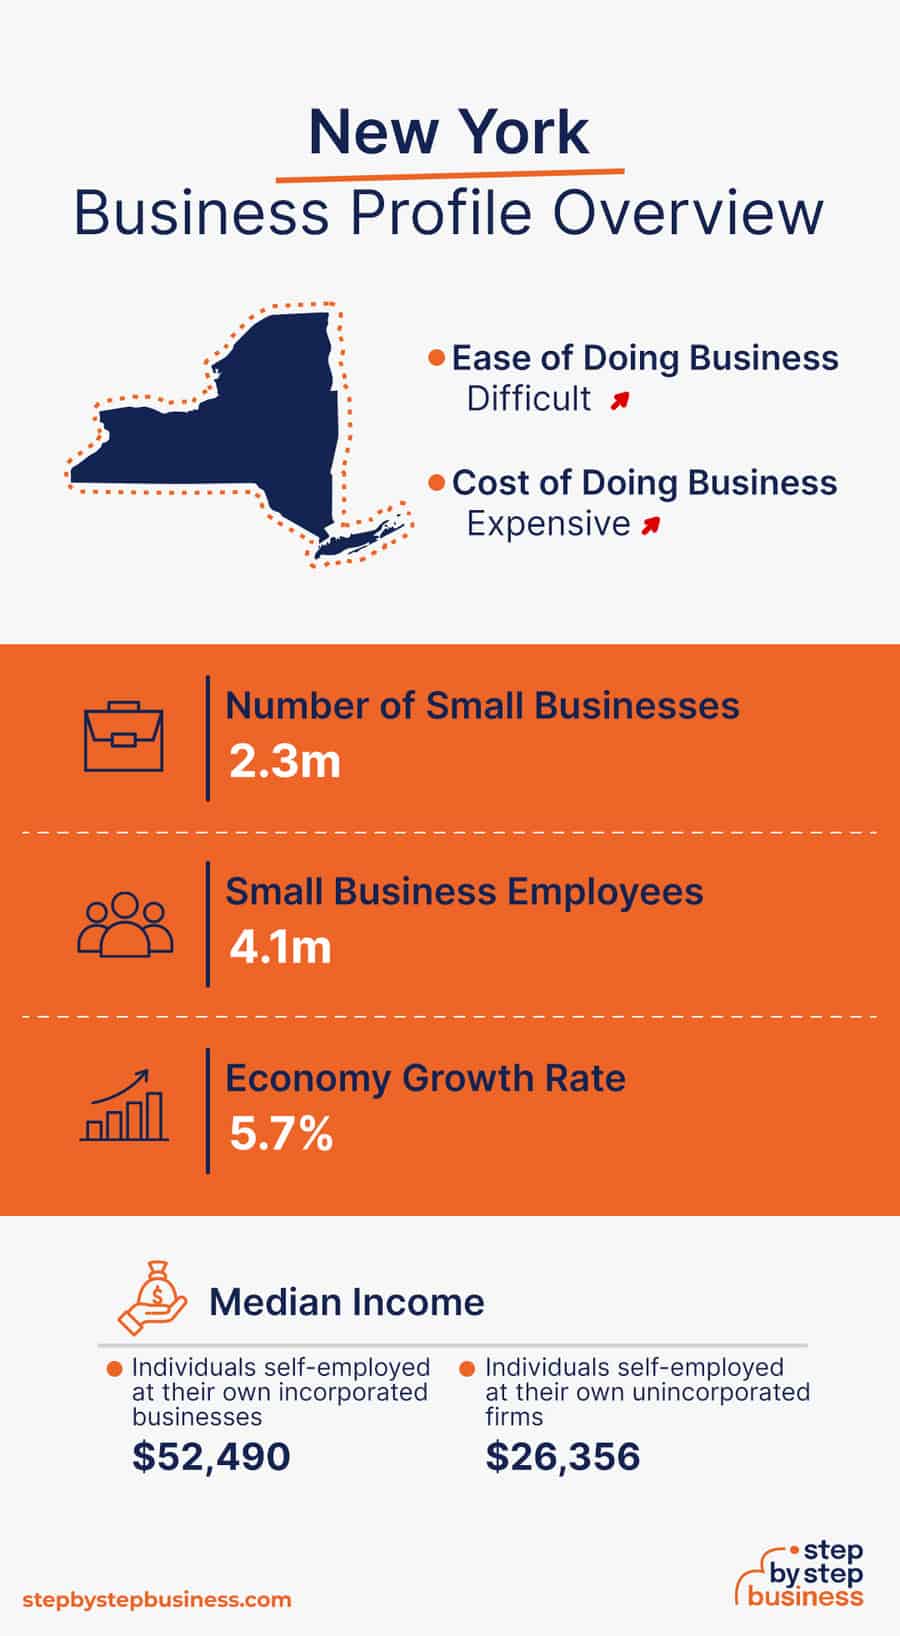 New York Business Profile Overview